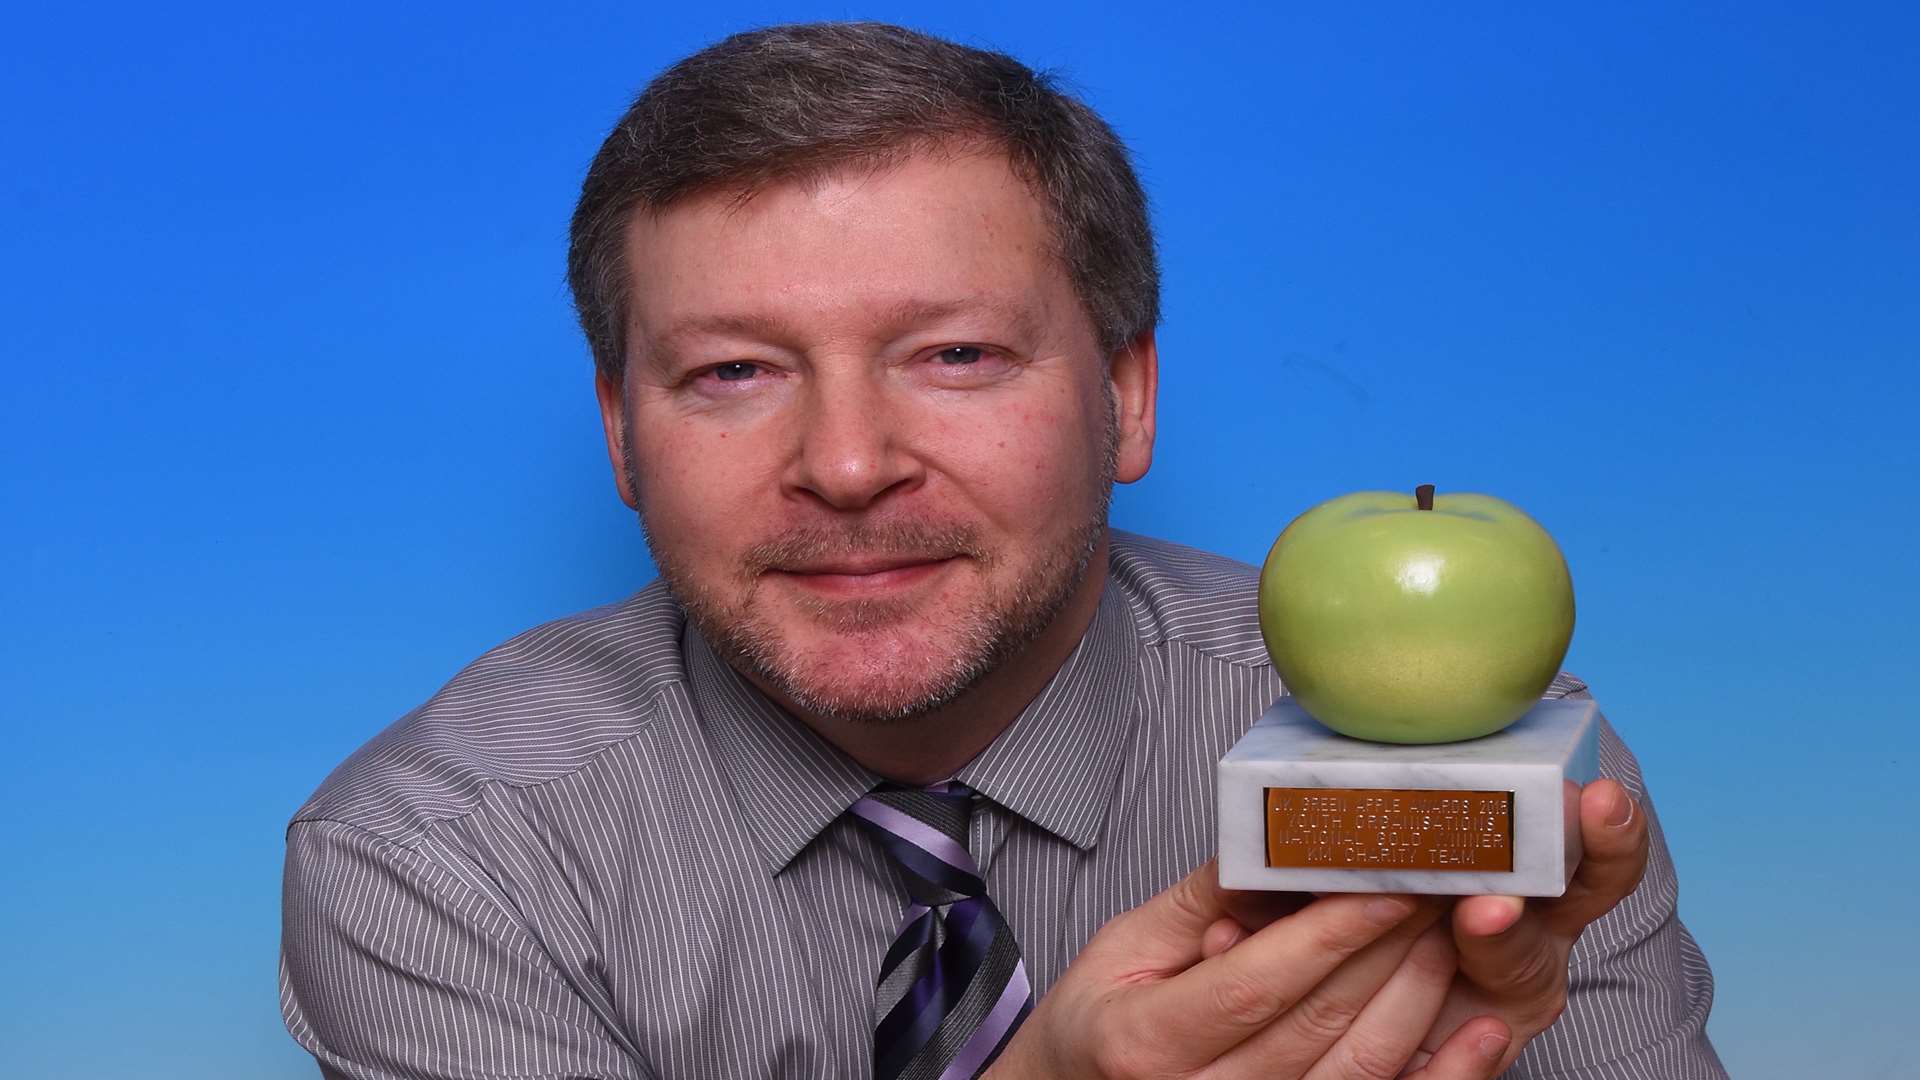 KM Charity Team chief executive Simon Dolby holds the charity's latest Green Apple Award.